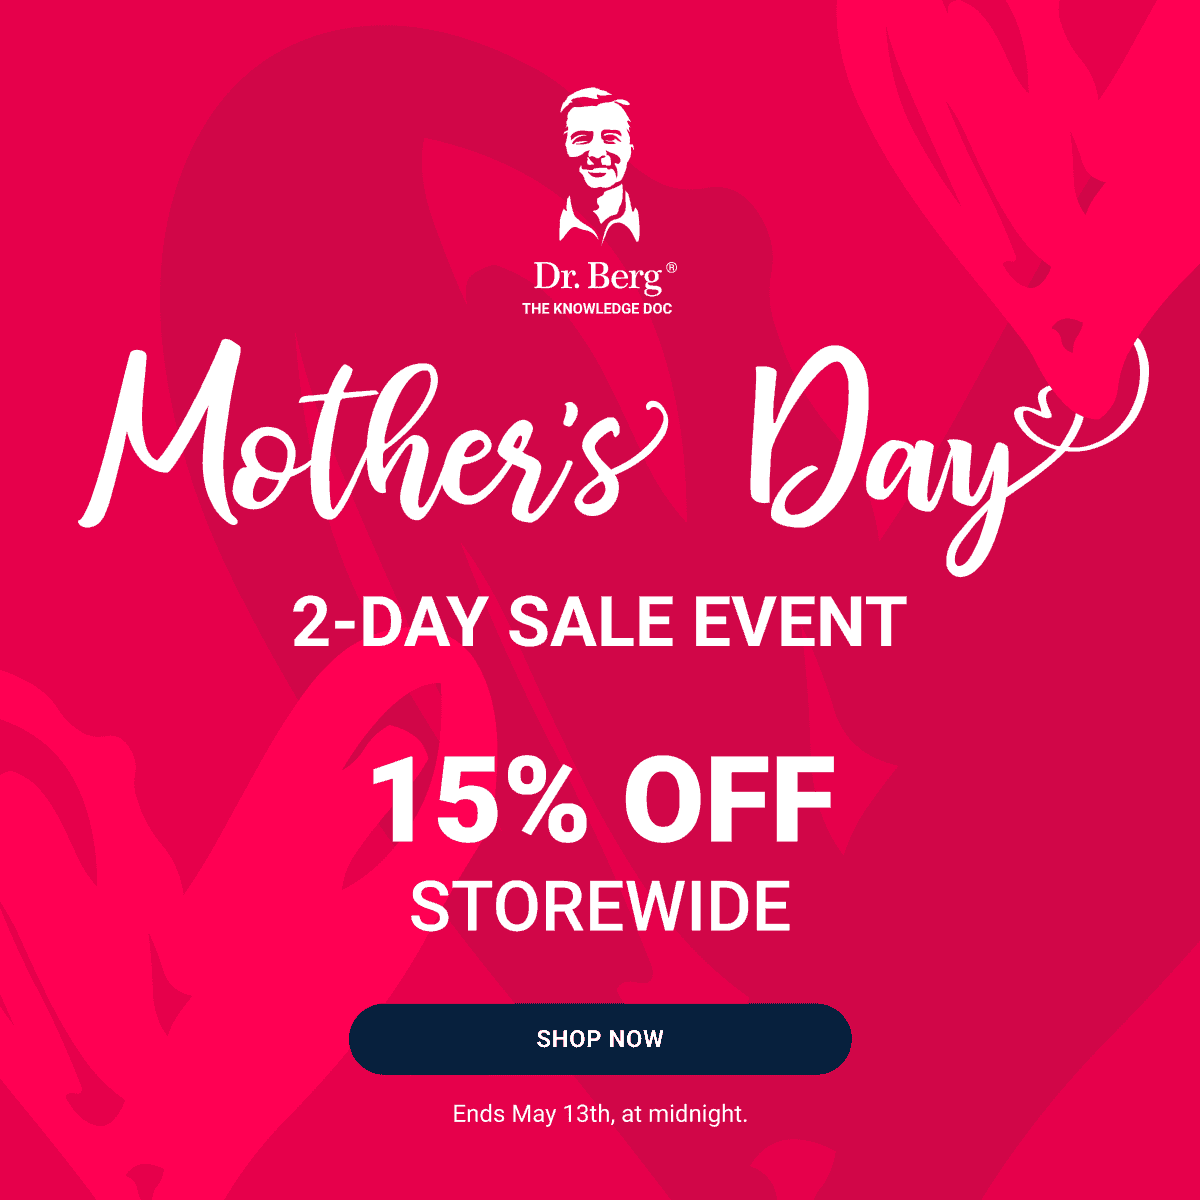 Mother's Day 2-Day Sale Event 15% off Storewide